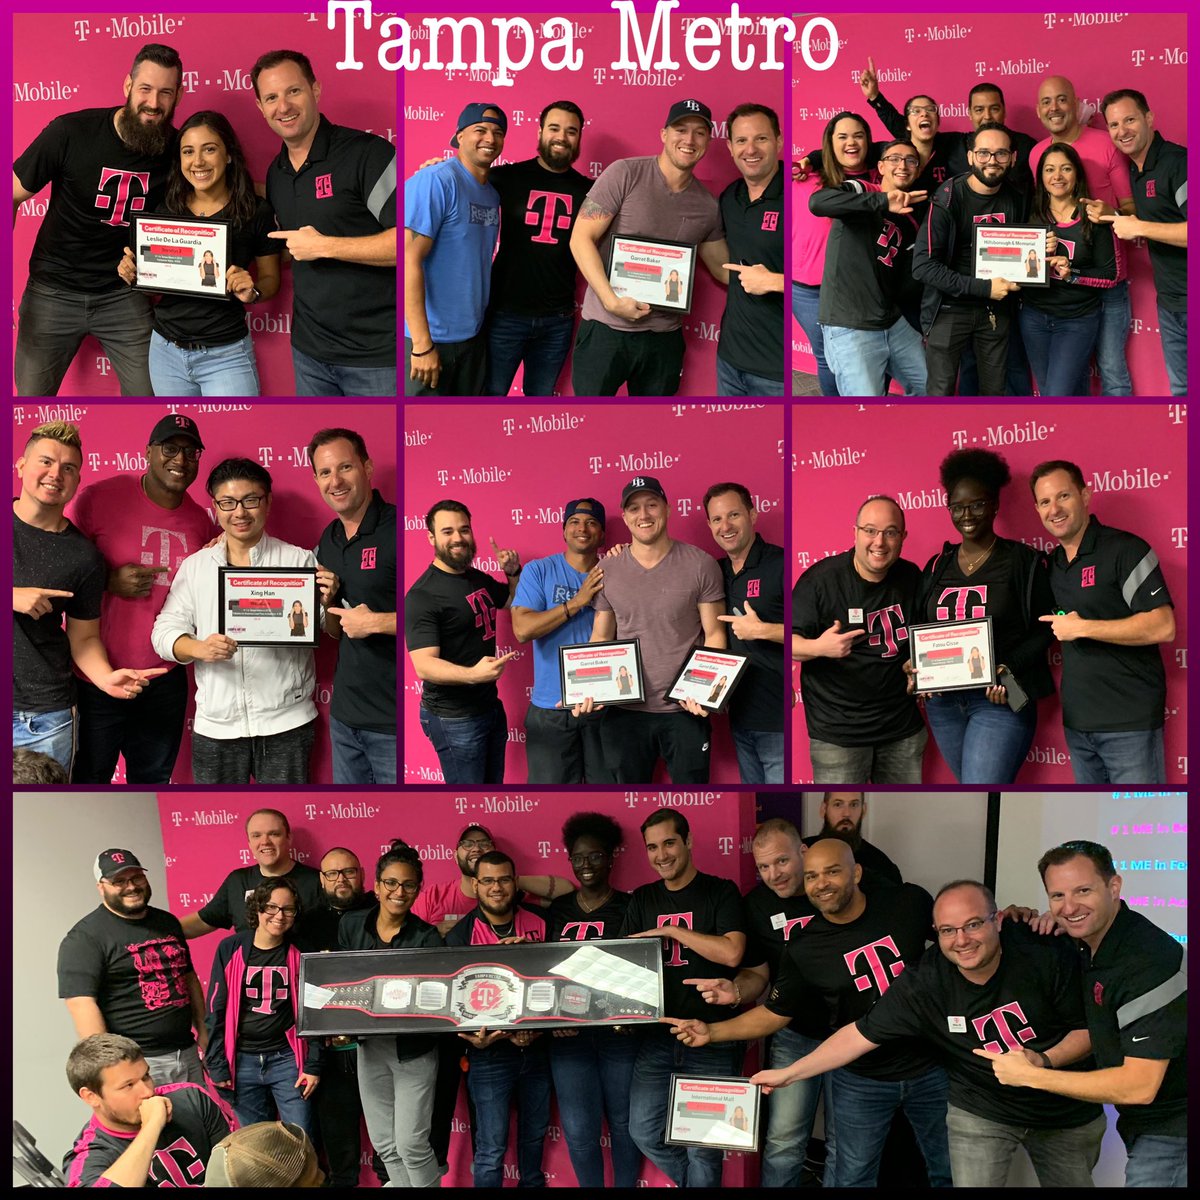 Today was an epic day for Tampa Metro. We laughed. We cried tears of gratitude and we celebrated the only way we know how loud and proud #WFLCobraProud #TampaMetro @GHengtgen @jboy1724 @M_Flo82 @ArthurToth2 @ChrisPedin89